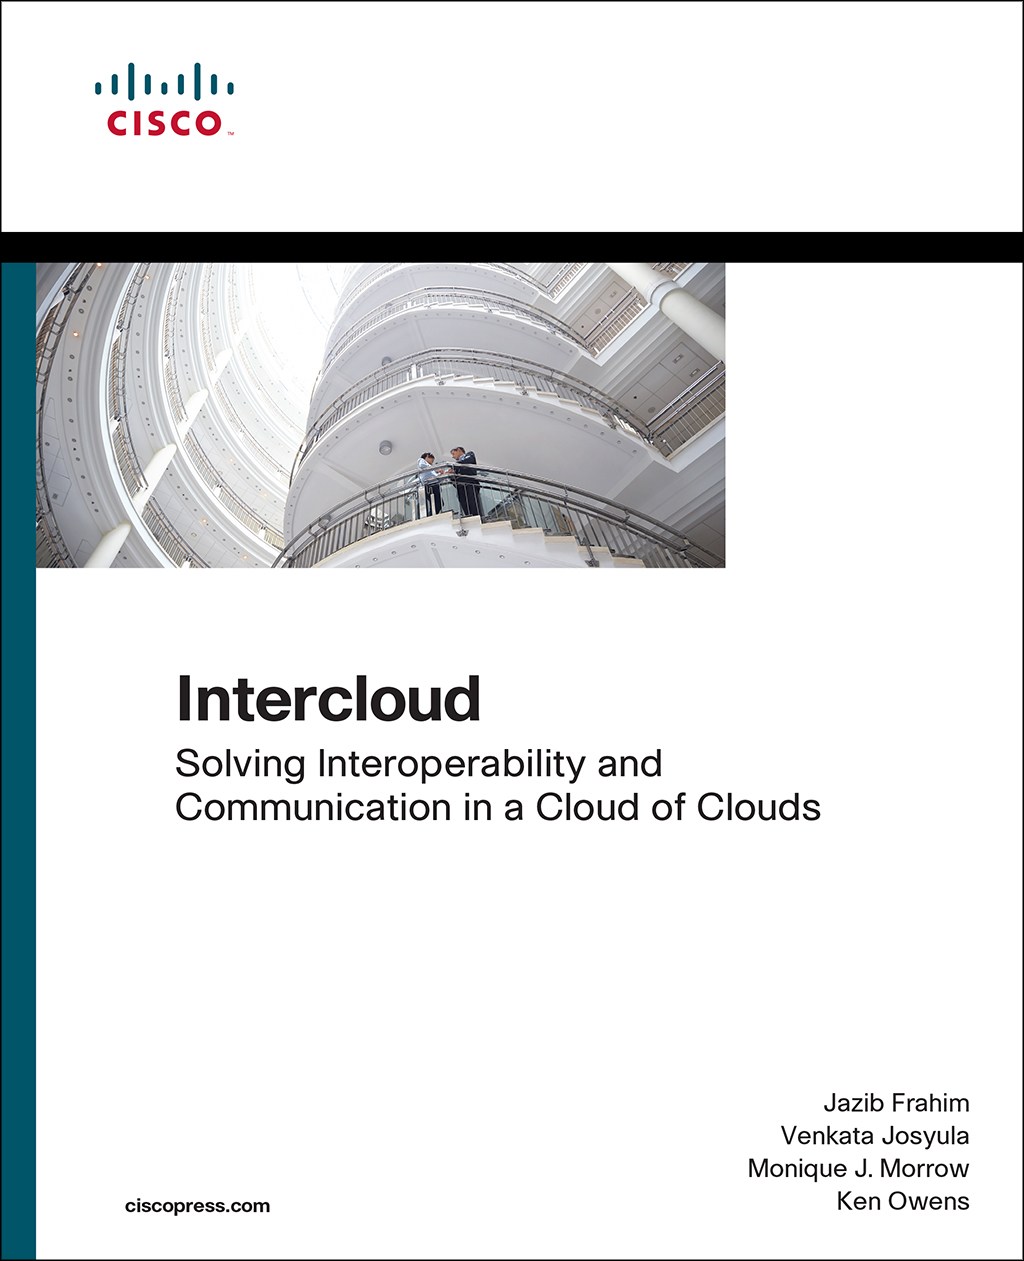 Intercloud: Solving Interoperability and Communication in a Cloud of Clouds